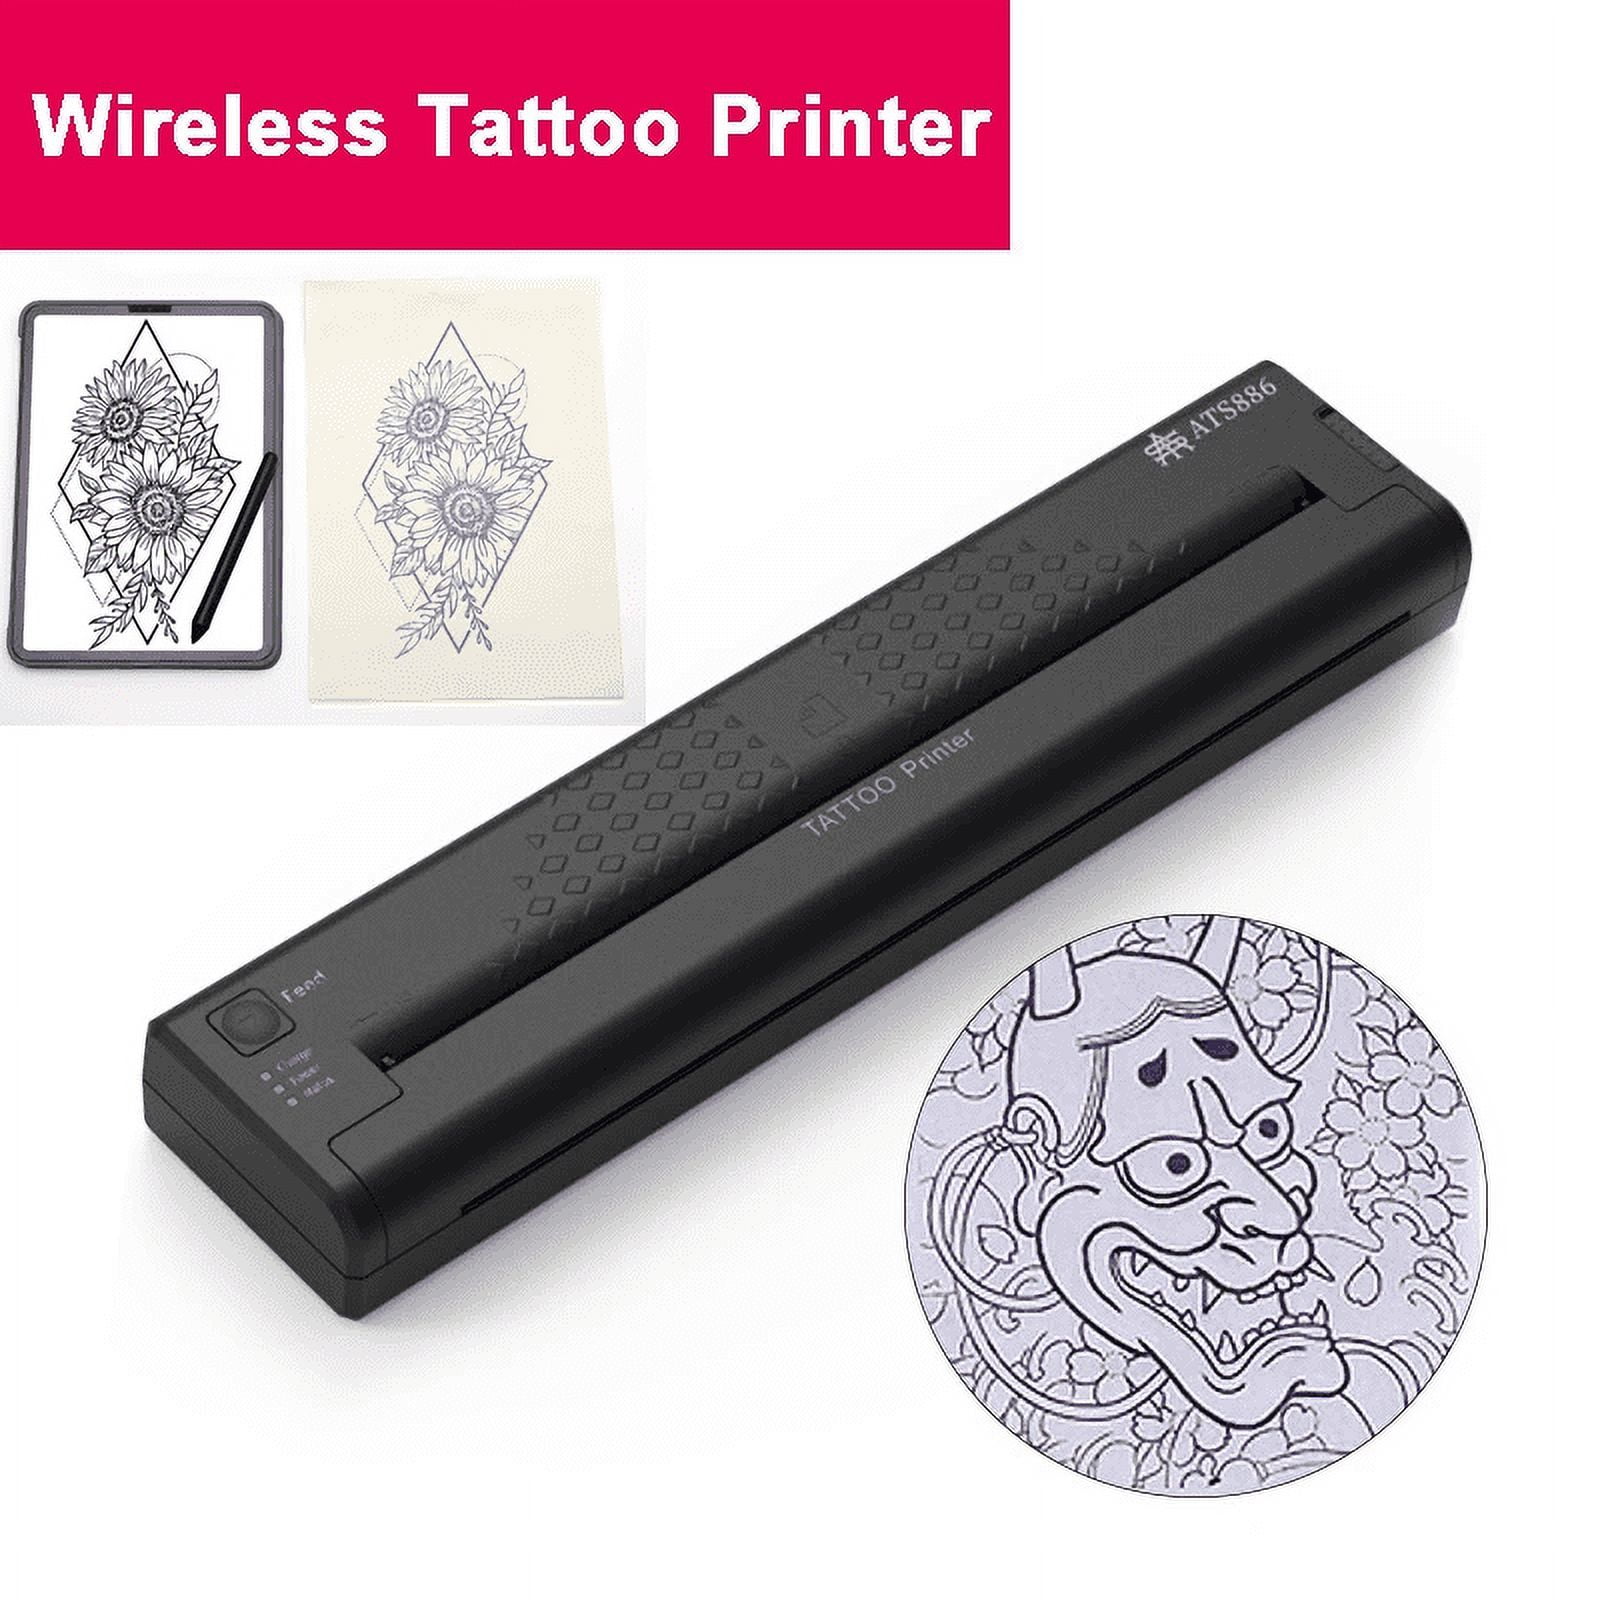 INKCHUM Tattoo Stencil Printer Bluetooth Tattoo Printer with 10pcs Transfer  Paper, 2500mAh Stencil Printer for Tattooing Compatible with iOS,Android